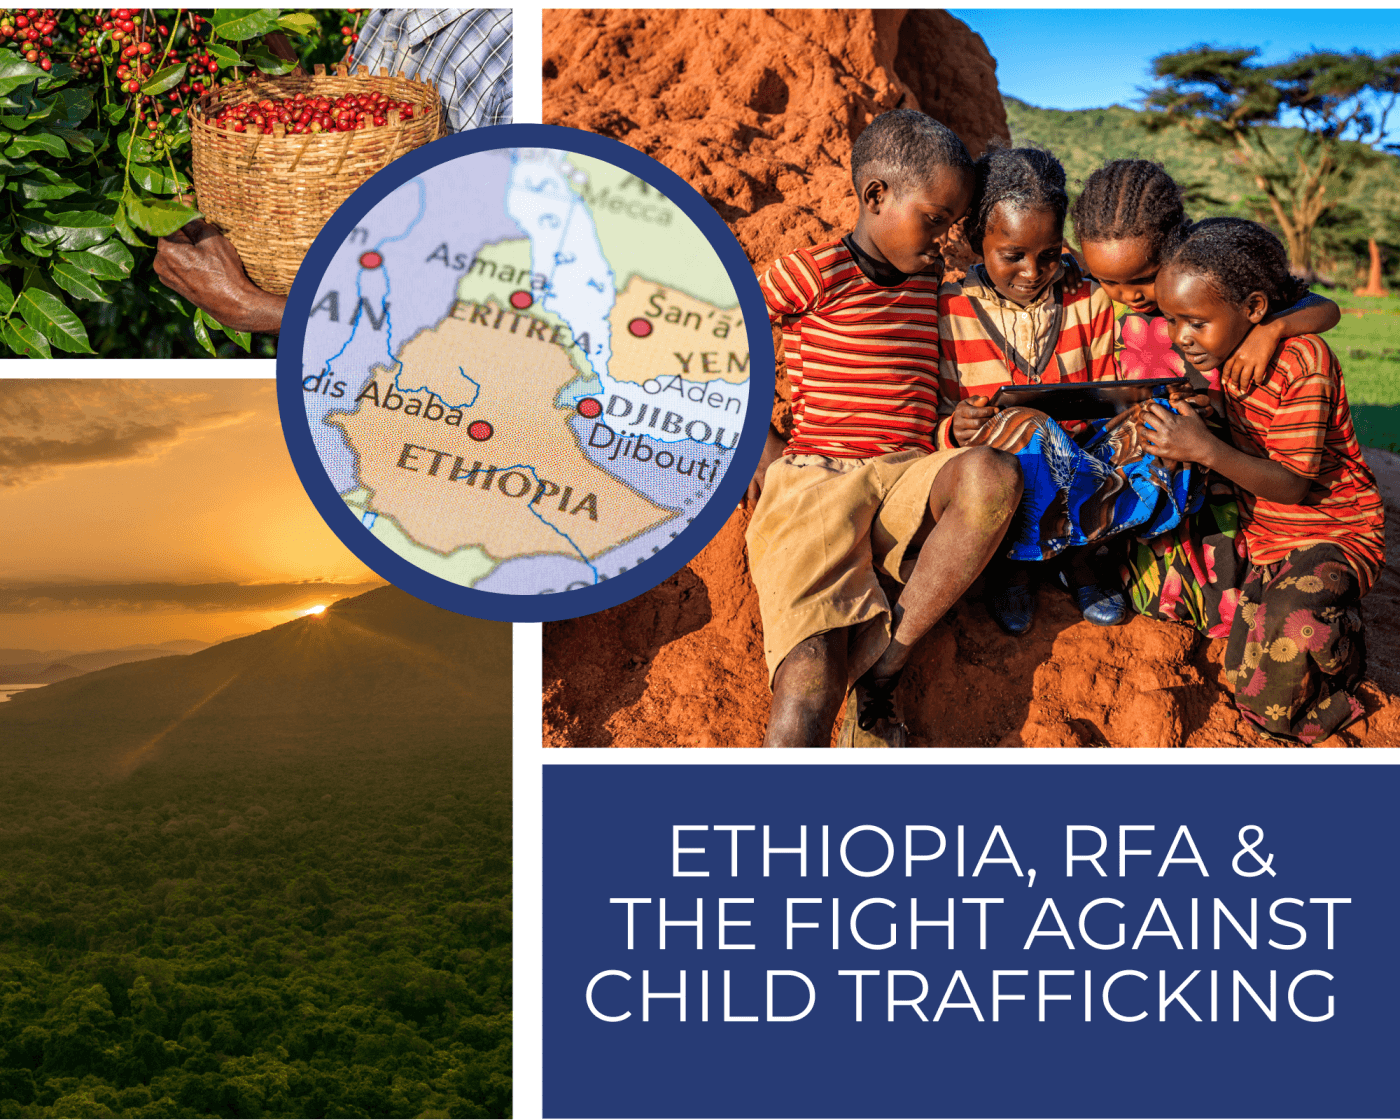 In the top left is a coffee plant being picked. In the bottom left is the landscape of Ethiopia. In the top right are Ethiopian children, and in the bottom right is text saying Ethiopia, RFA & the fight against child trafficking. In the center is Ethiopia on a map.